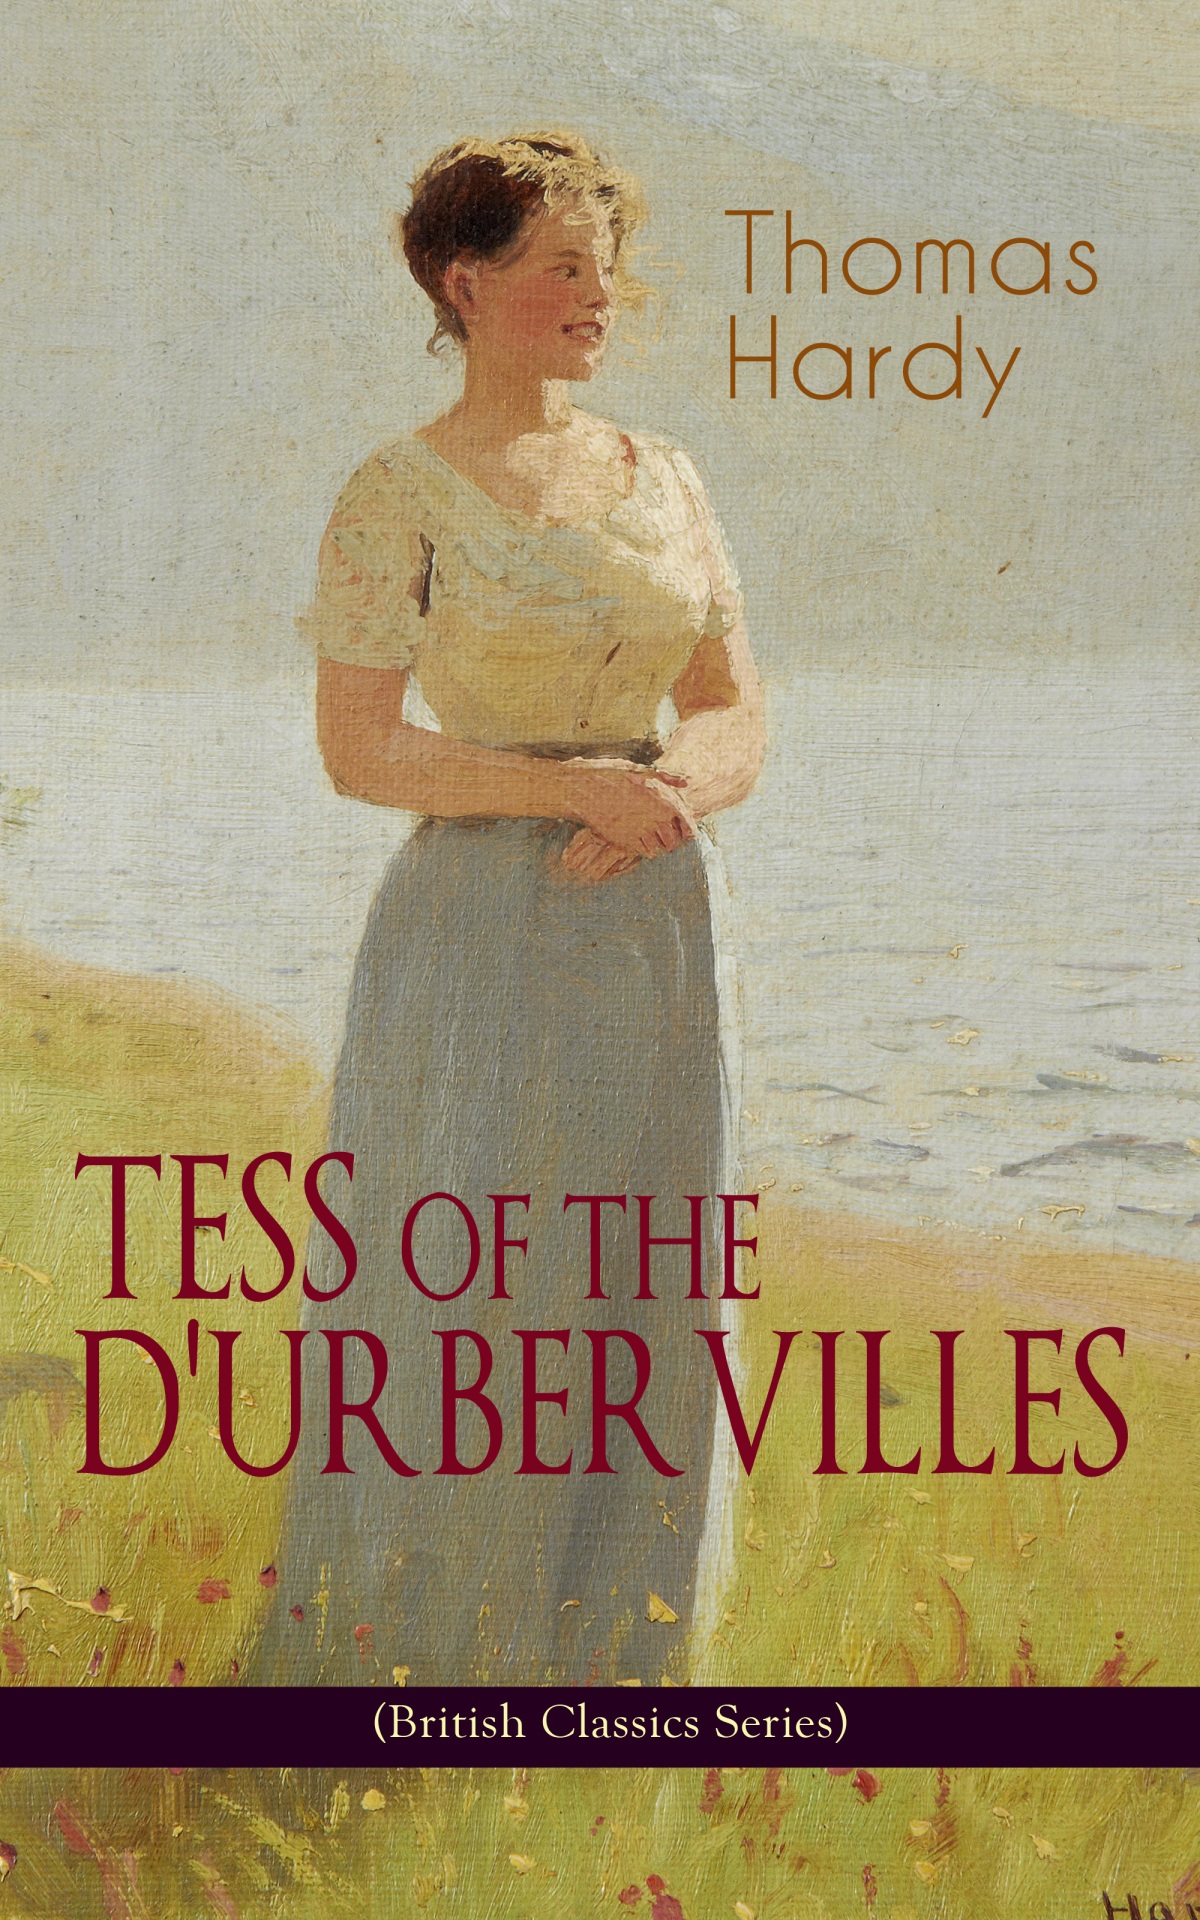 Tess of the d’Urbervilles by Thomas Hardy: A Review